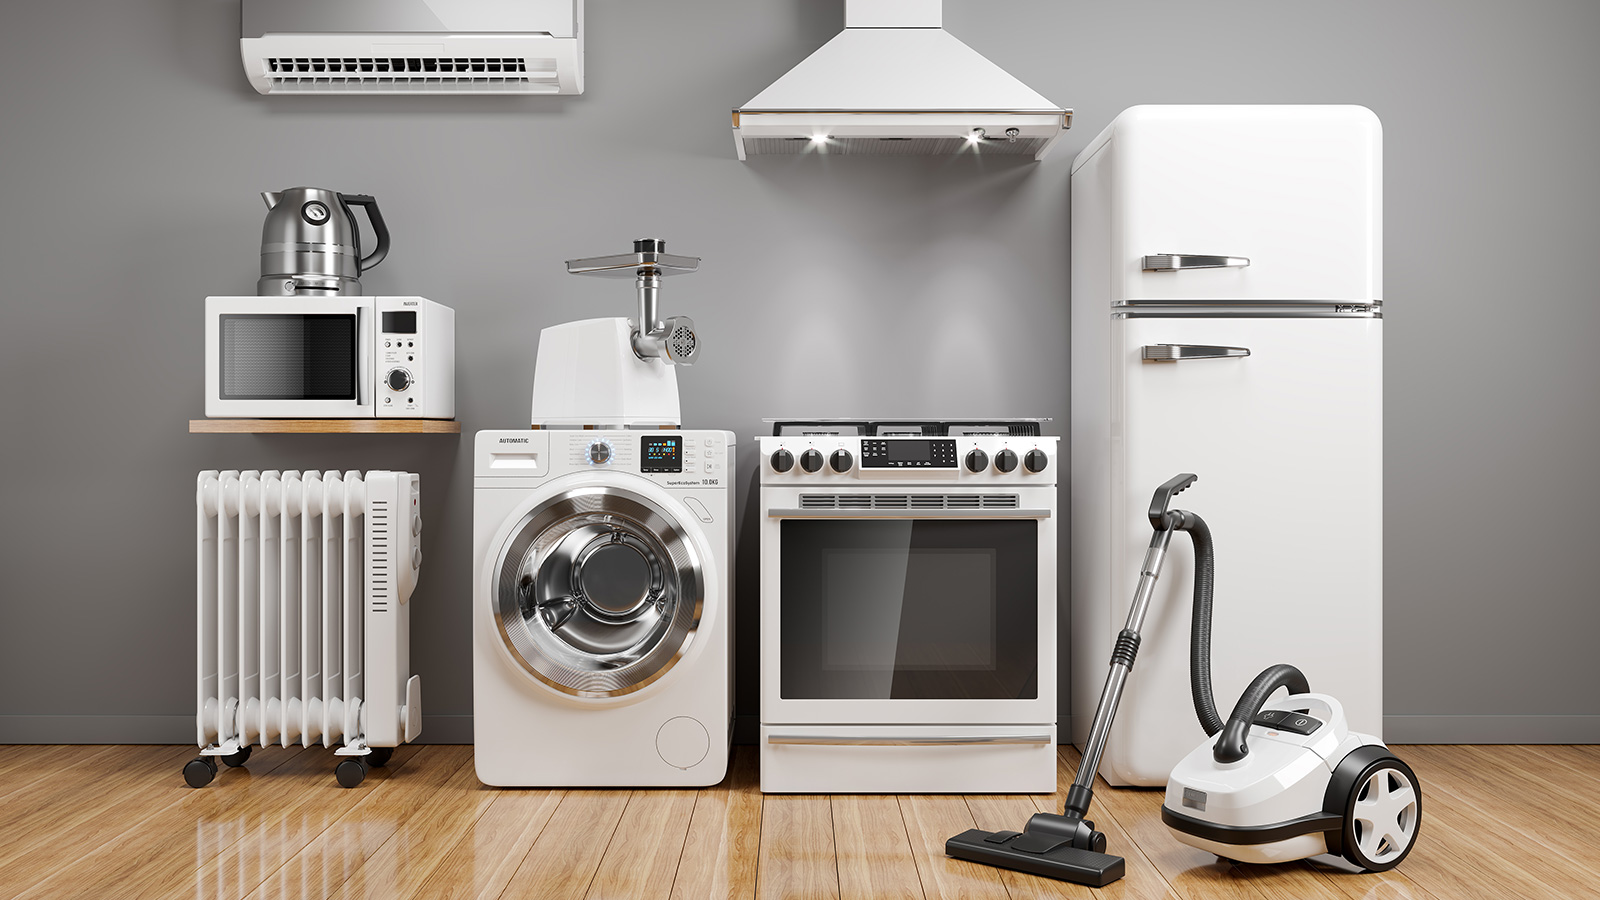 5 Things You Should Look at When Choosing a New Appliance